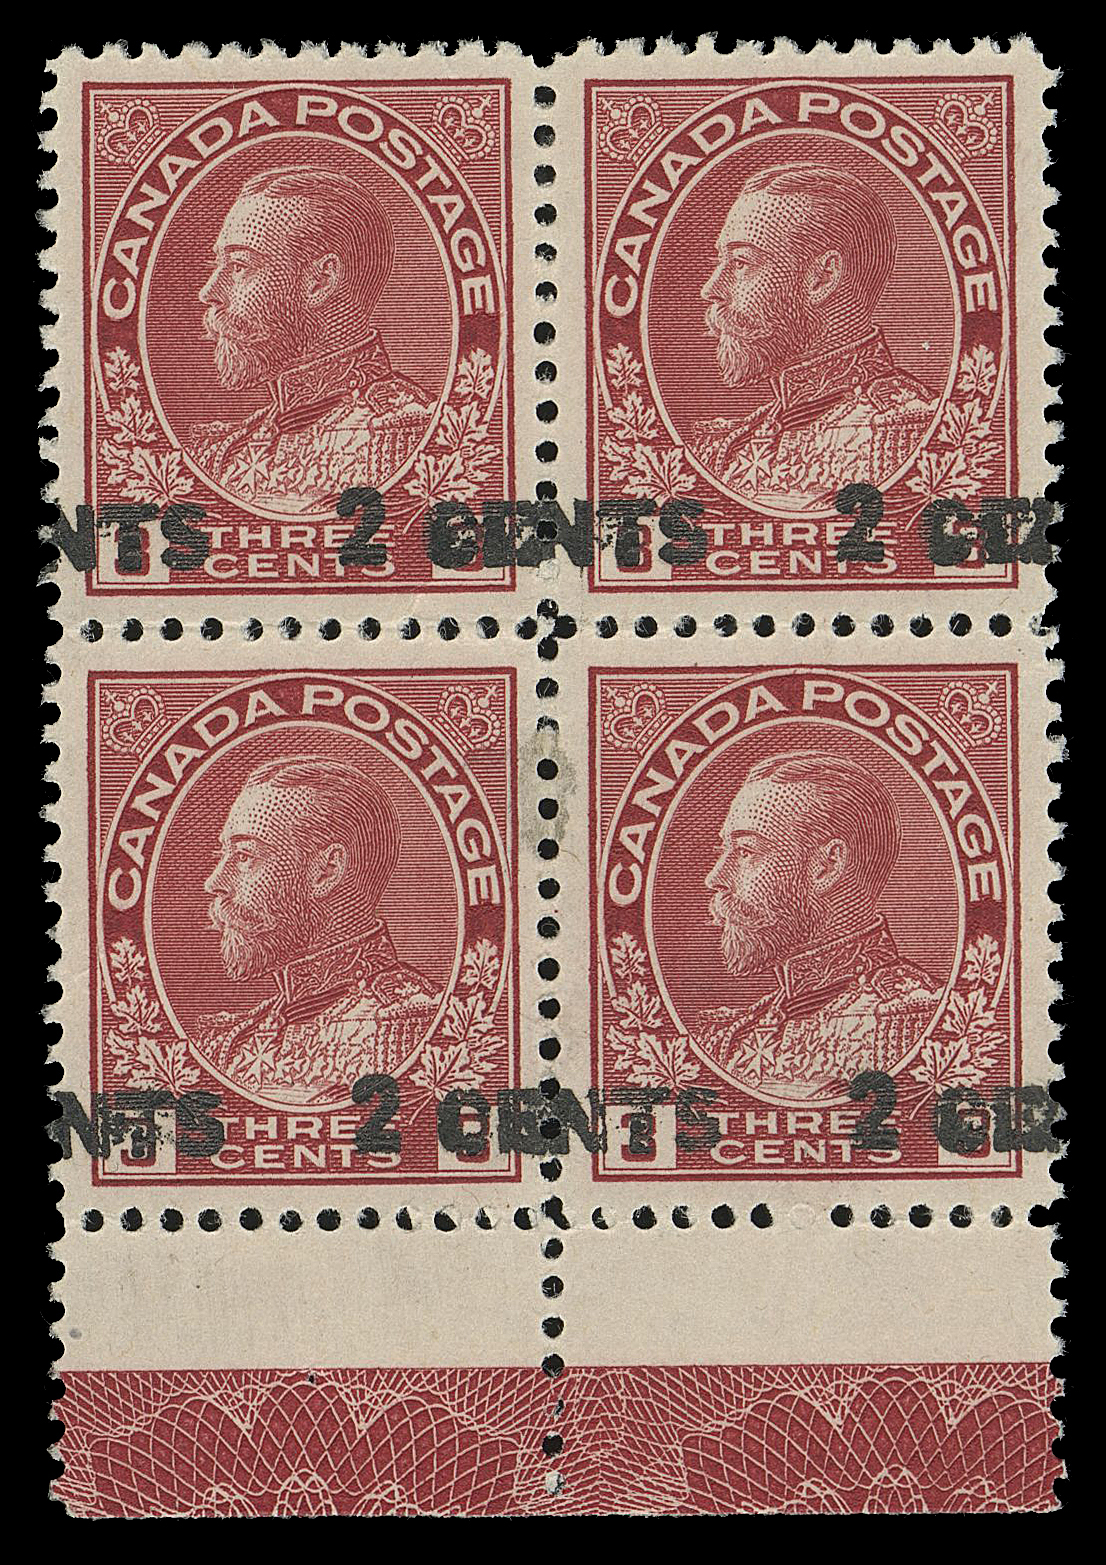 ADMIRAL STAMPS  139i,An extremely well centered mint block with shifted surcharge, showing full strength Type D lathework, LH at top, some gum glazing on lower pair (small area shows through), a very scarce surcharged lathework block, VF

Provenance: Harry Lussey, Maresch Sale 131, June 1981; Lot 1301